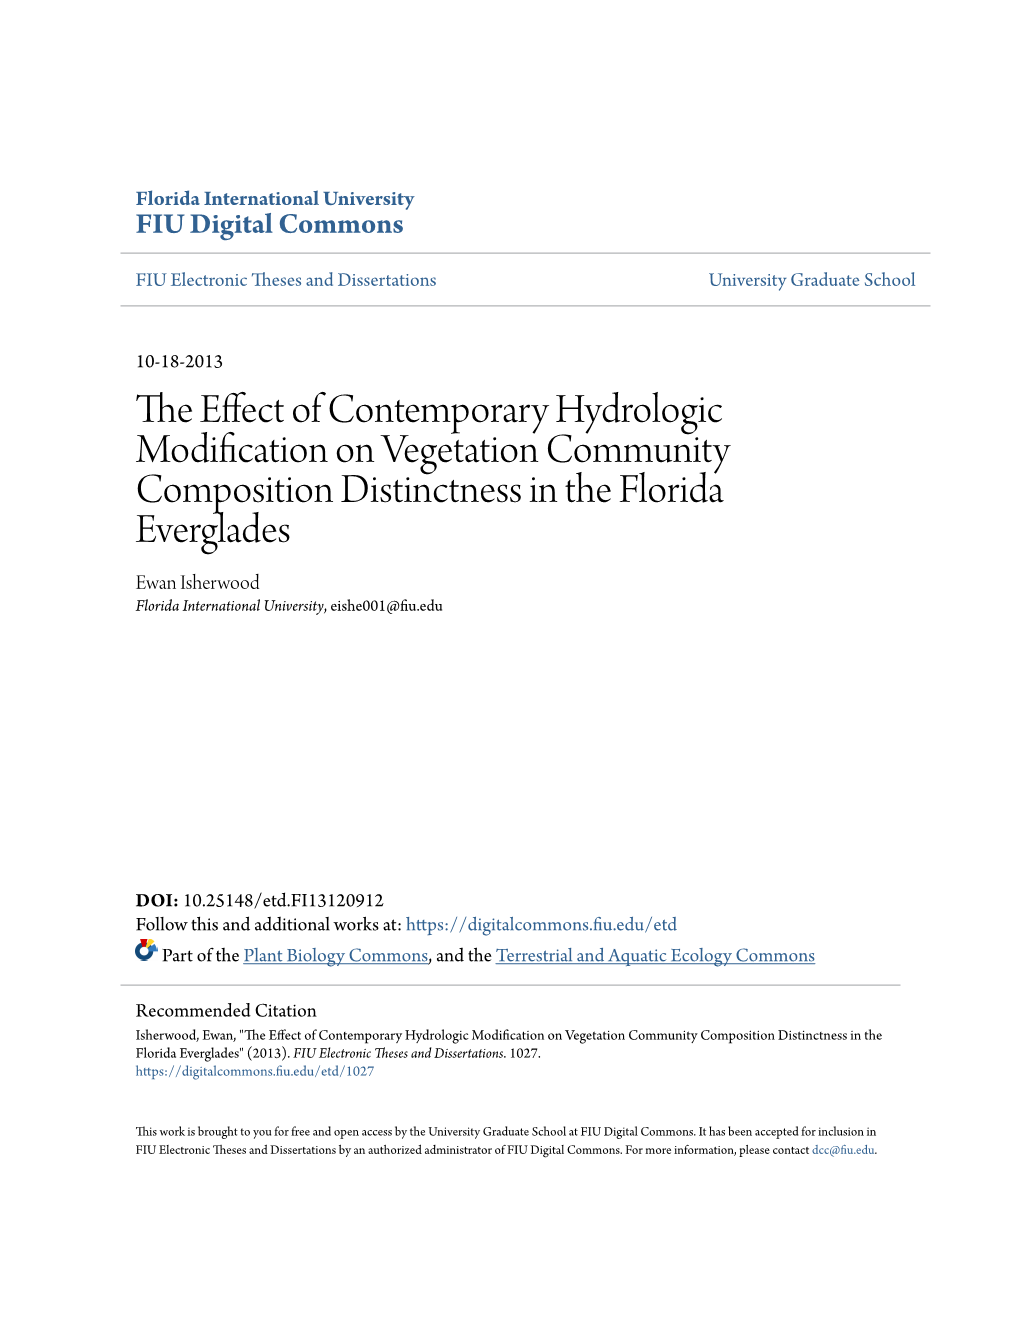 The Effect of Contemporary Hydrologic Modification on Vegetation Community Composition Distinctness in the Florida Everglades" (2013)